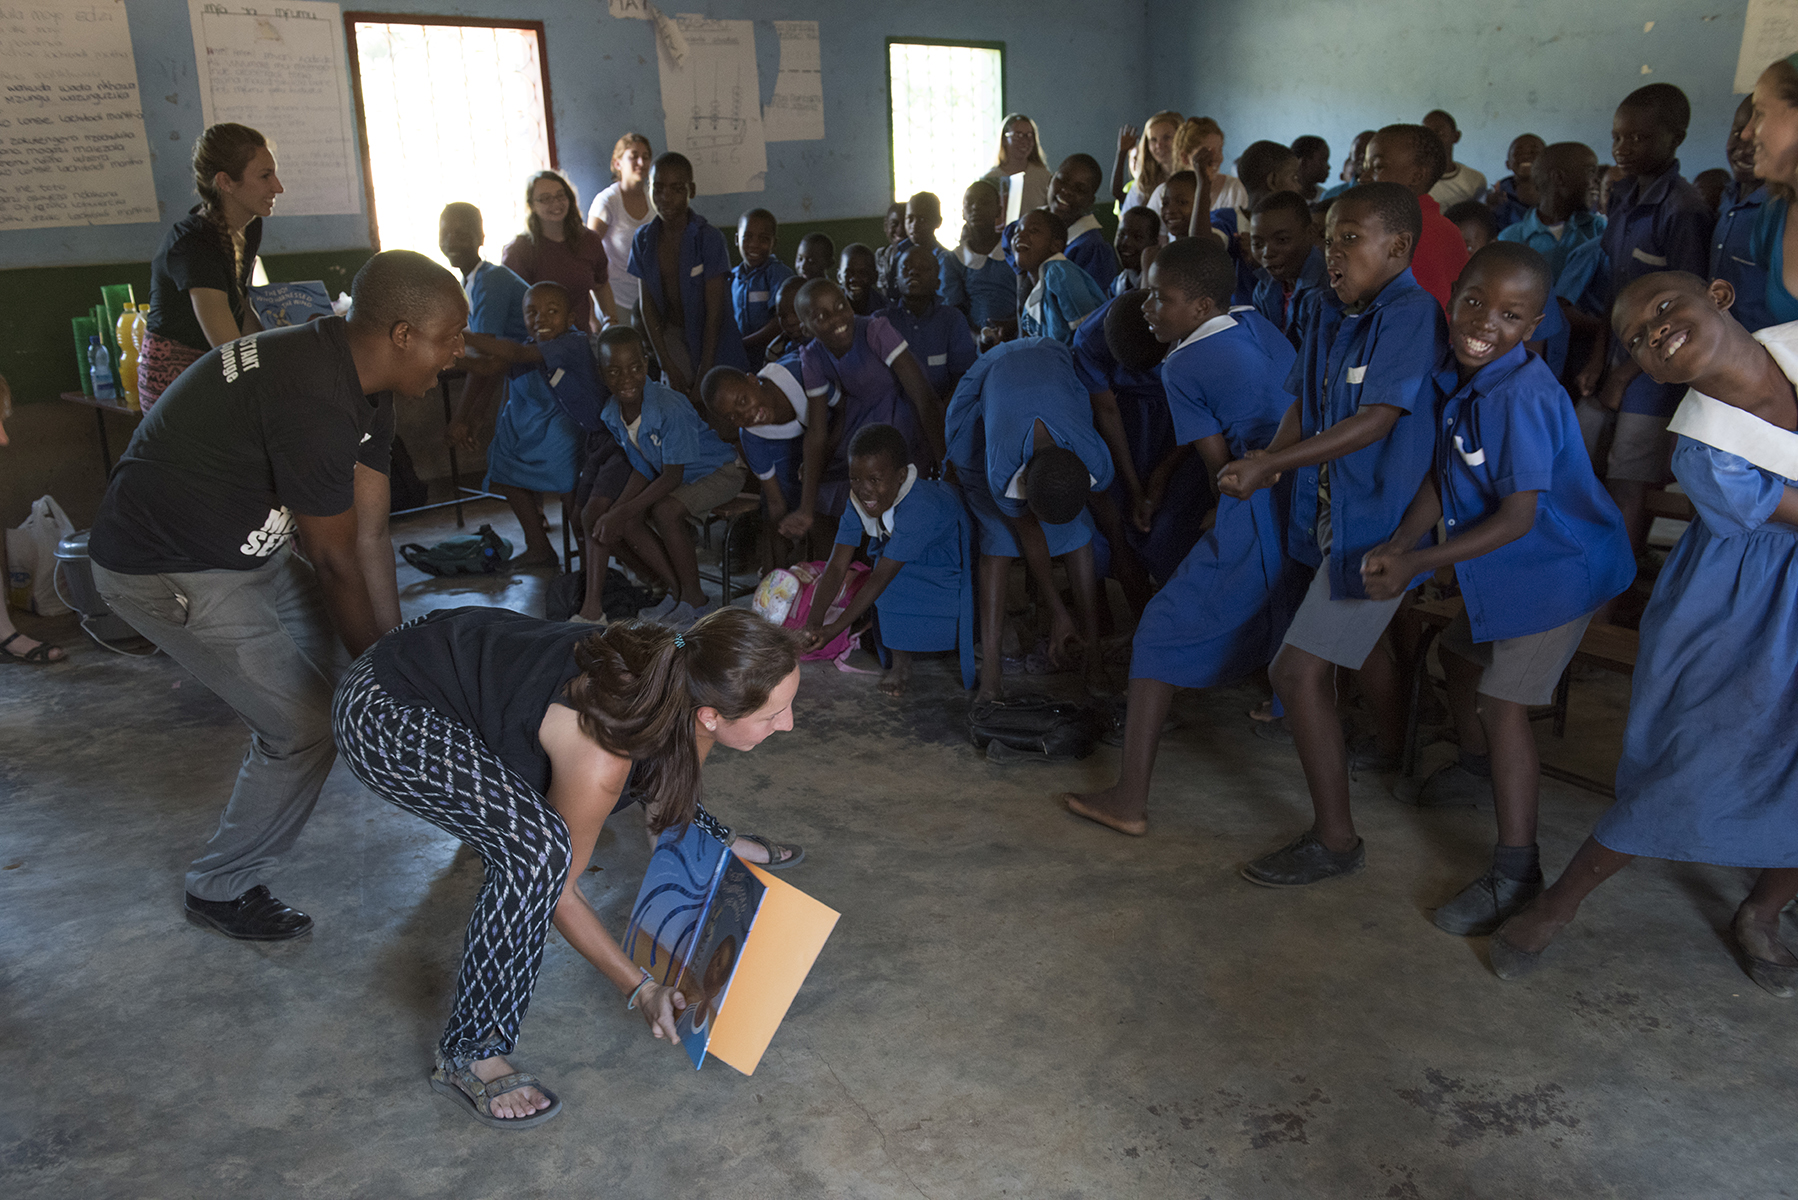 Elon students work with school children in Baluti, a village in the outskirts of Blantyre, Malawi. The students spent a week at, Namasimba, a rural school, tutoring students in reading comprehension.